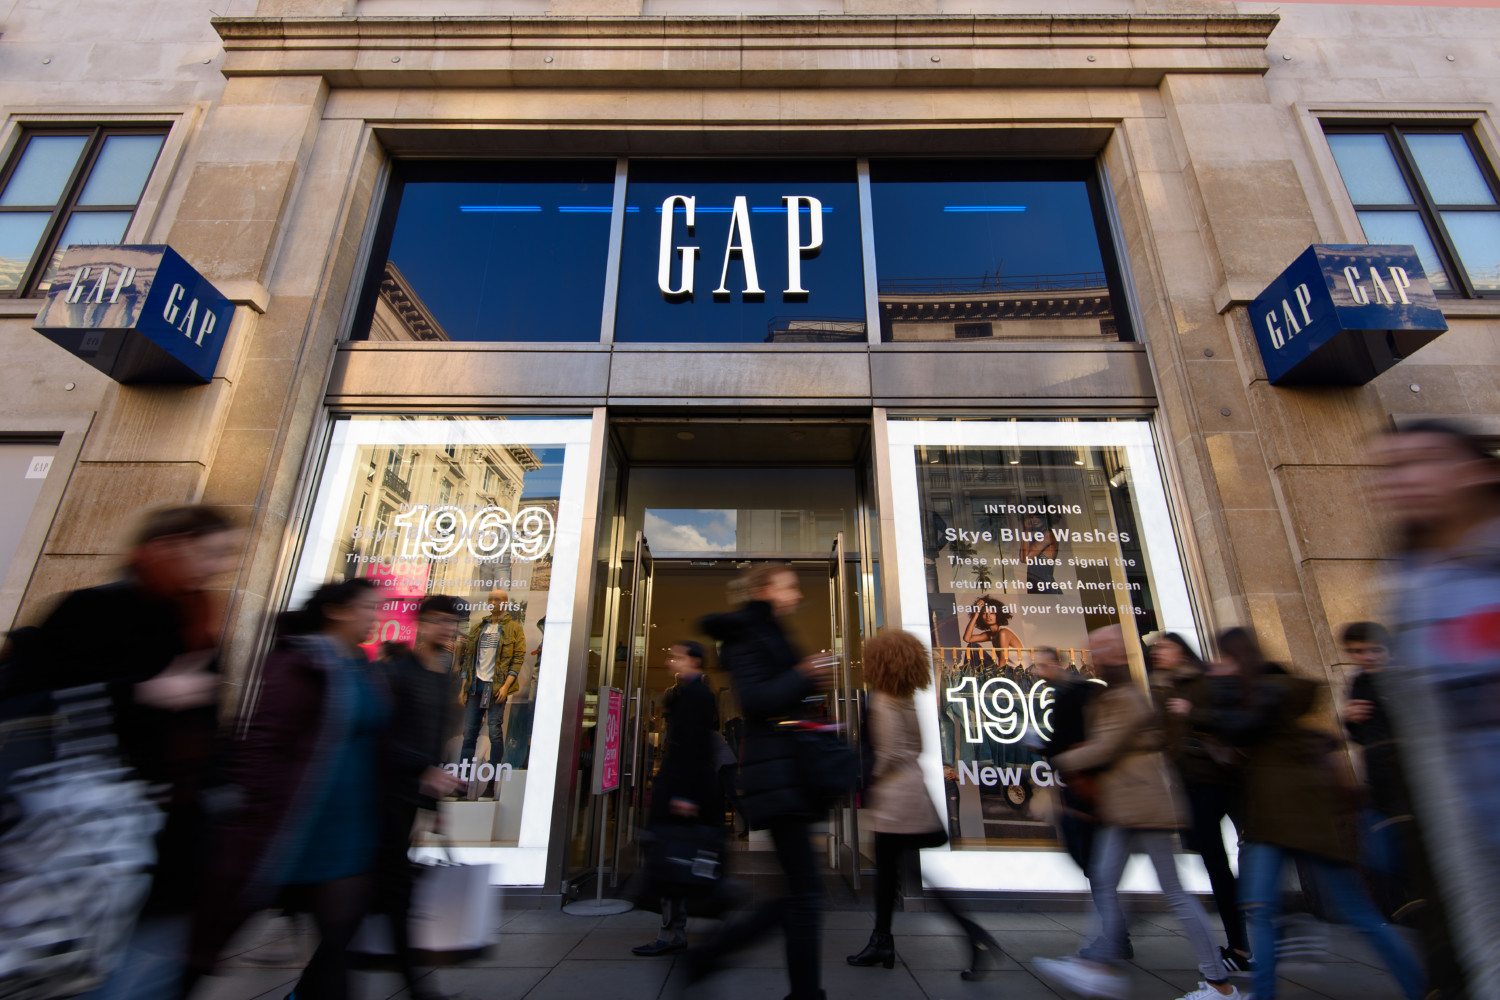 Fashion Store Gap Are The Latest American Company Facing British Tax Questions